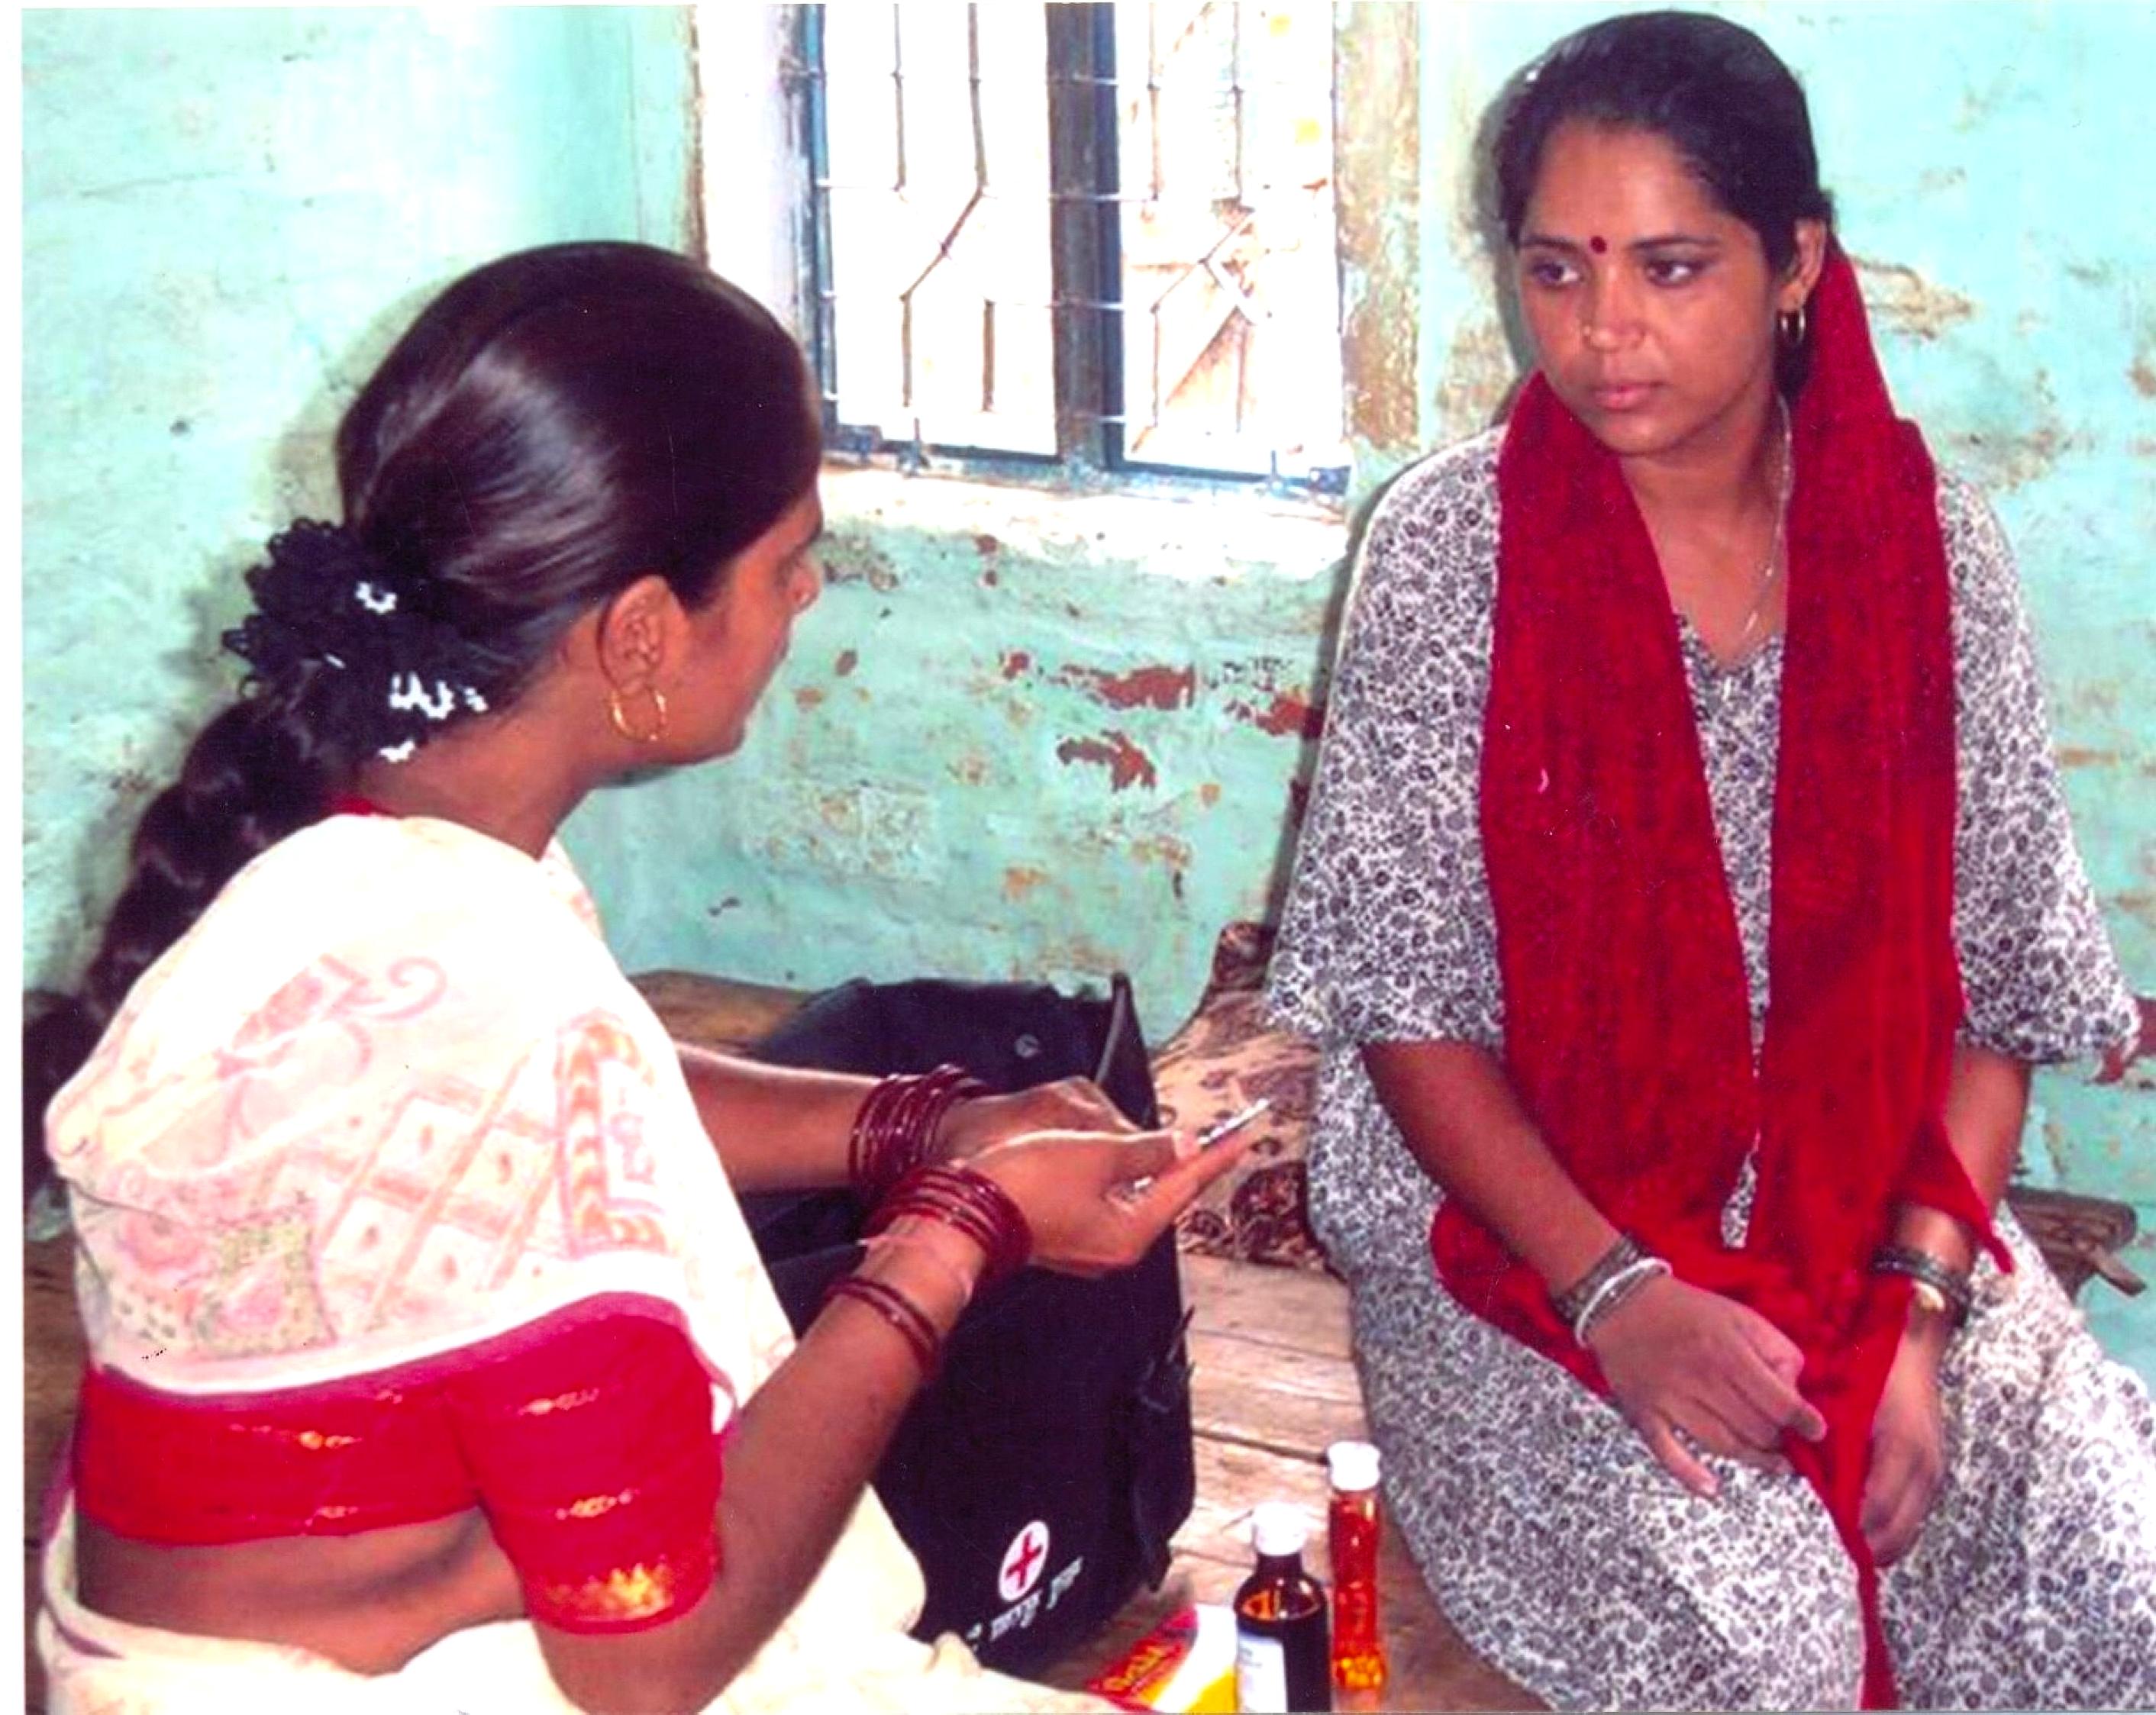 Family planning project in india is increasing access to family